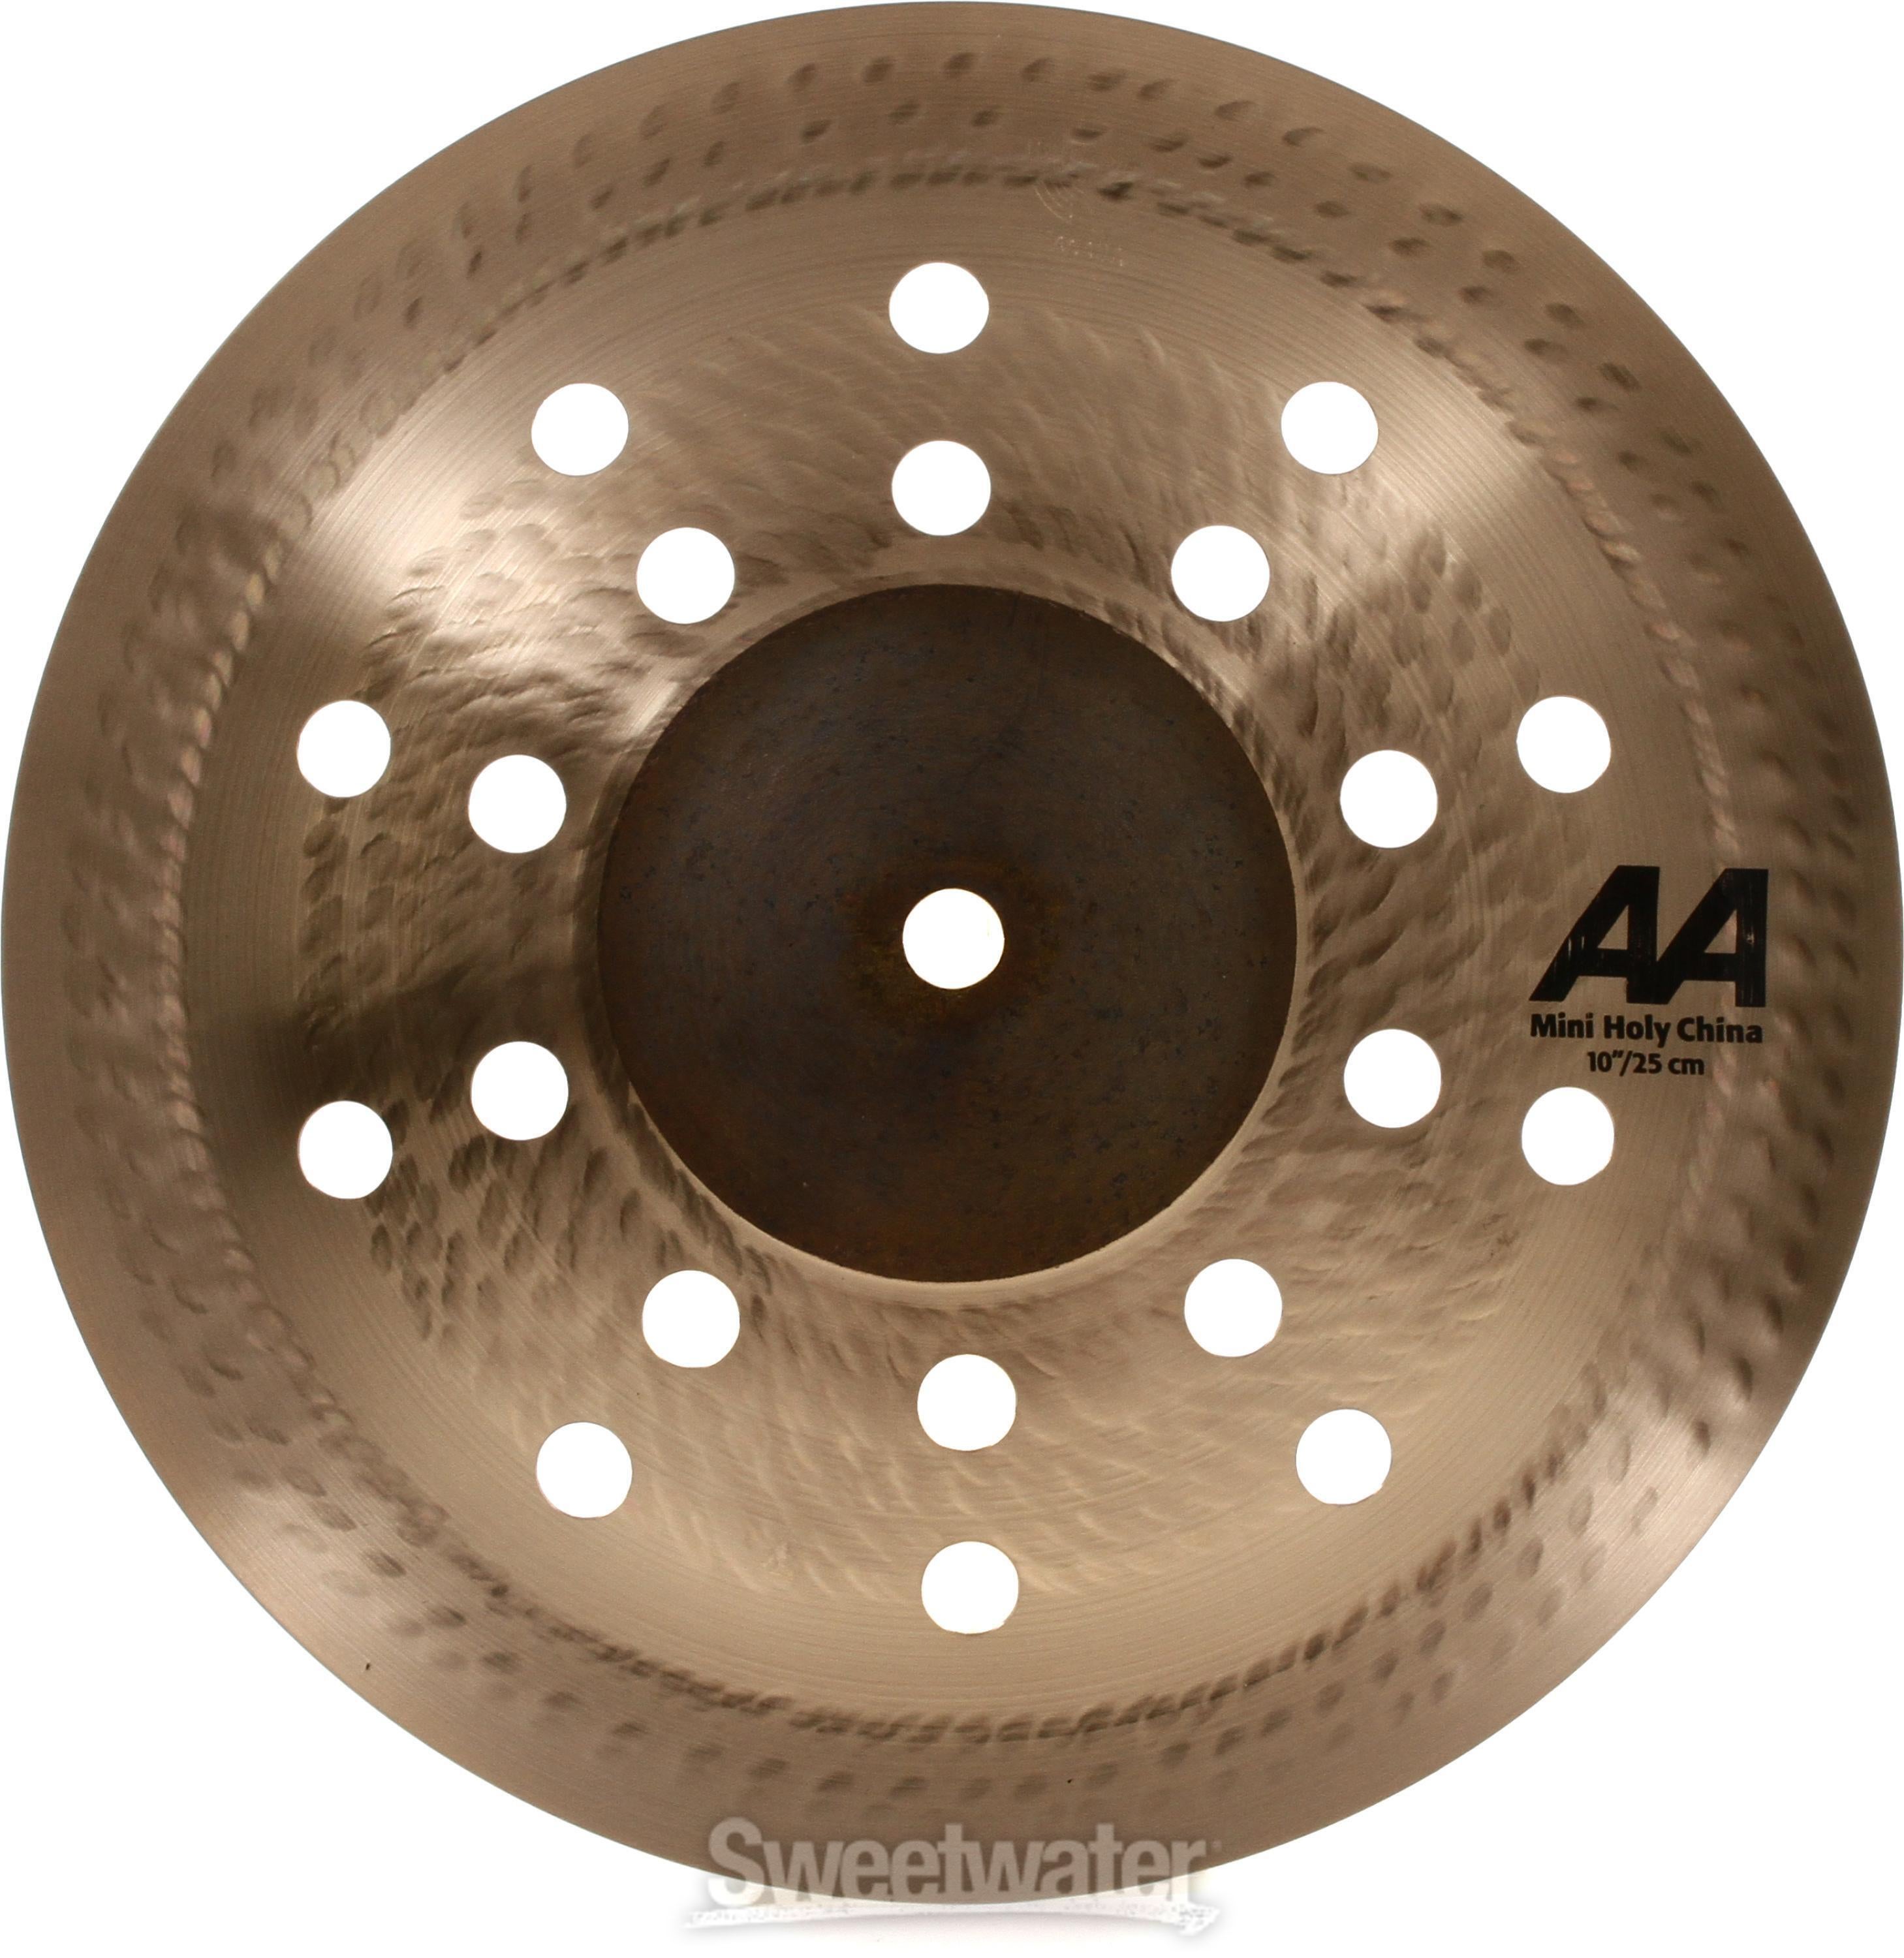 Sabian Mini Monster Stack | Sweetwater